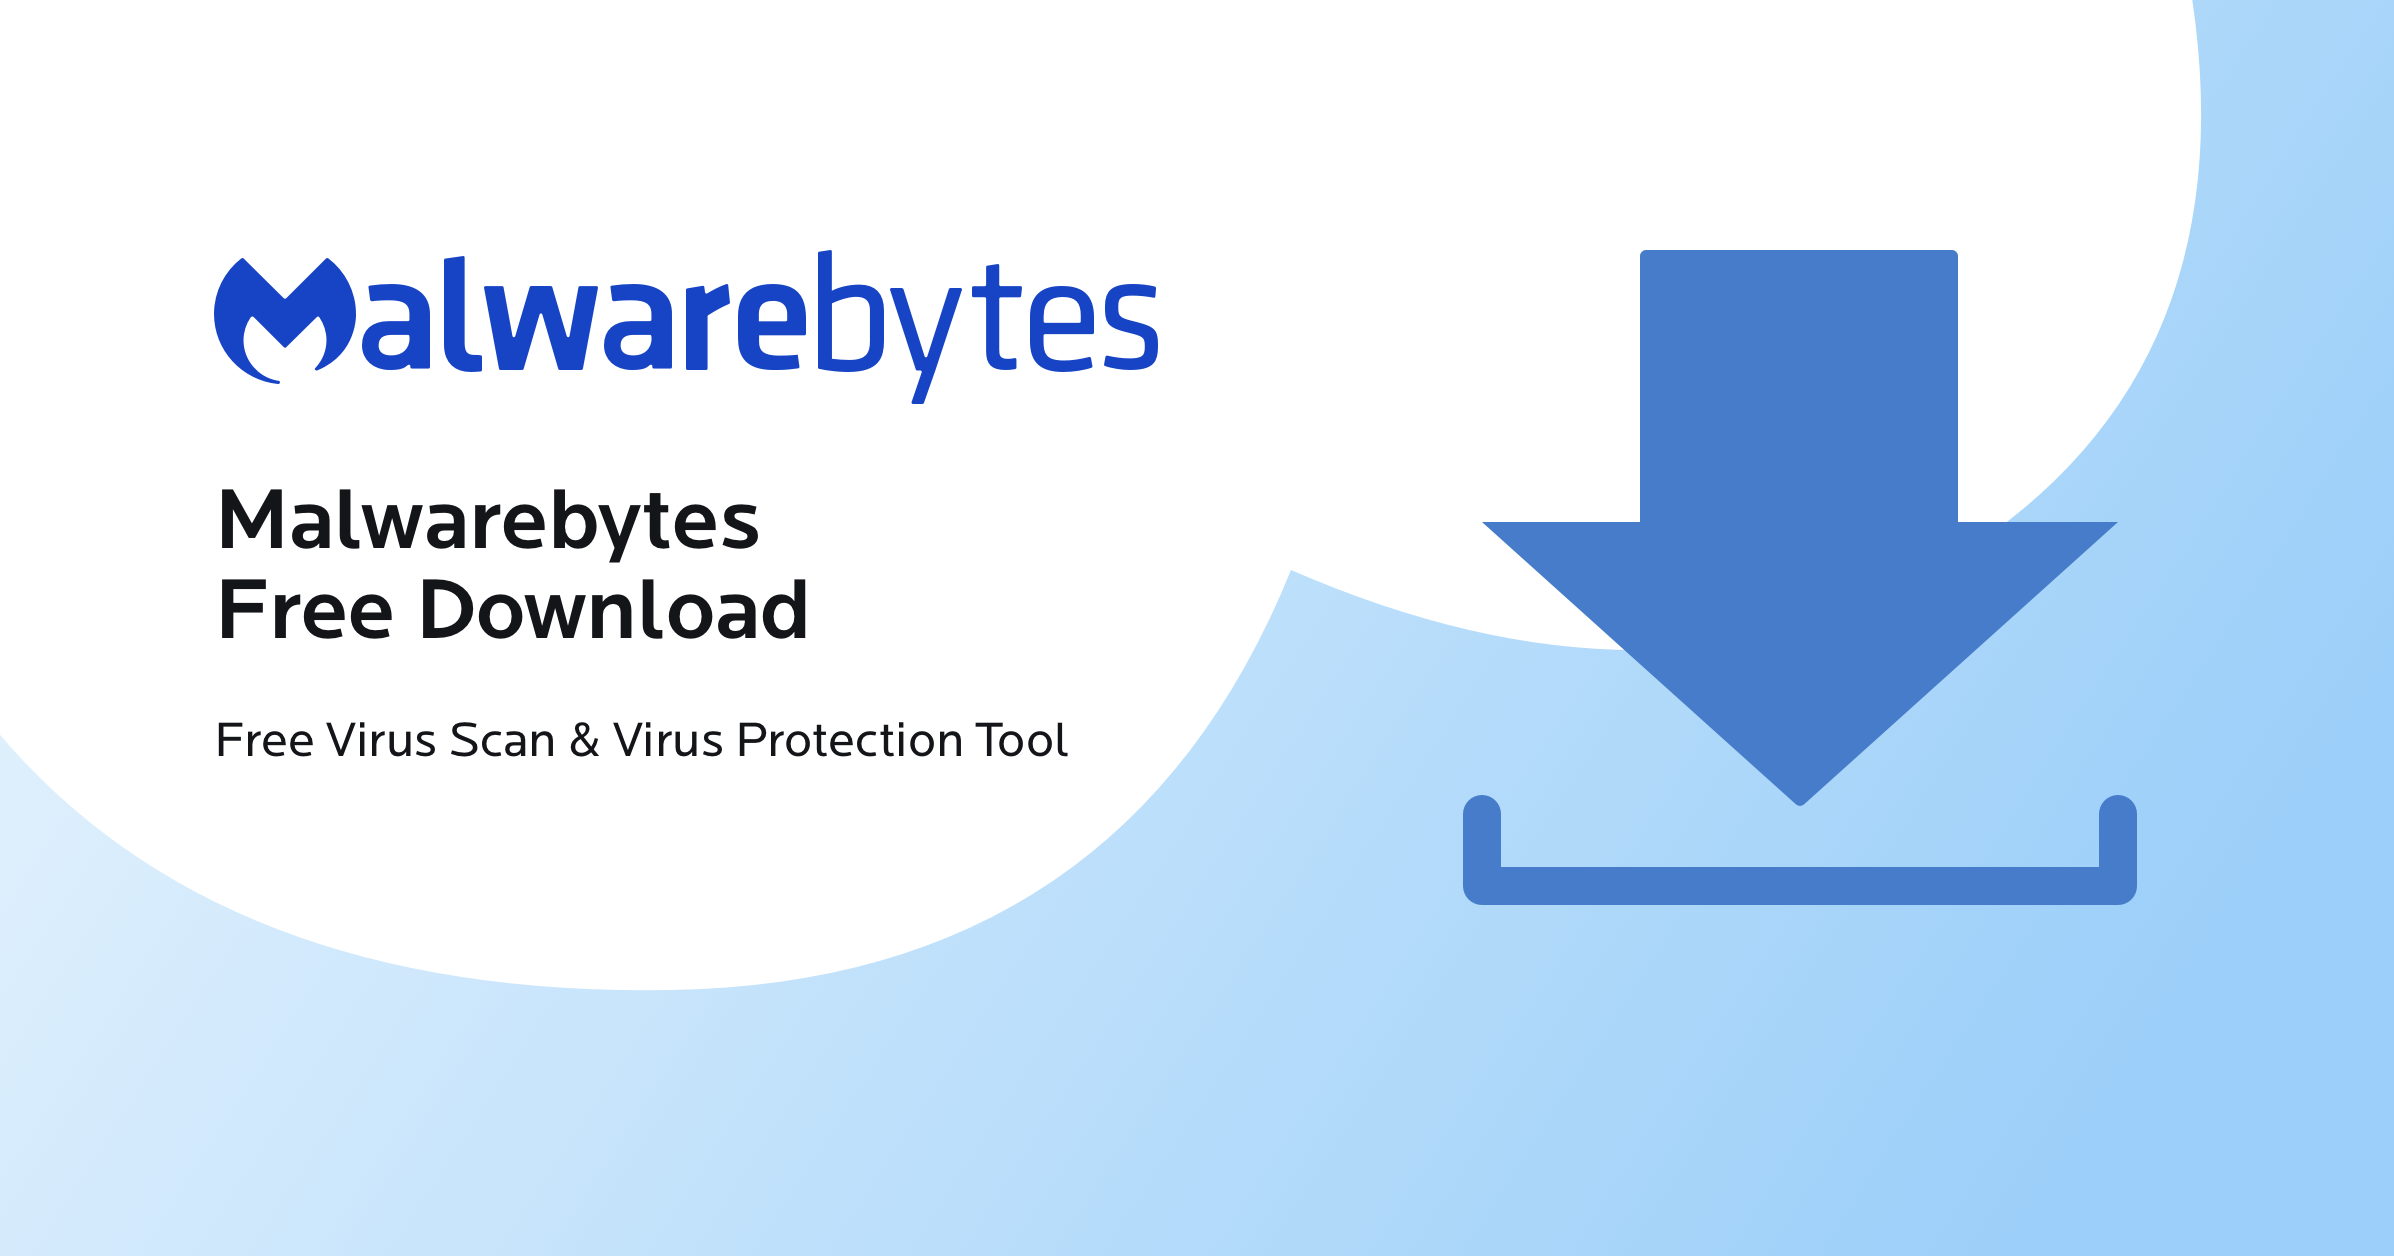 Malwarebytes Anti-Malware: A powerful anti-malware tool that can detect and remove bpcd.exe and other malicious files.
Norton Power Eraser: A specialized tool from Symantec that can target and eliminate stubborn threats like bpcd.exe.